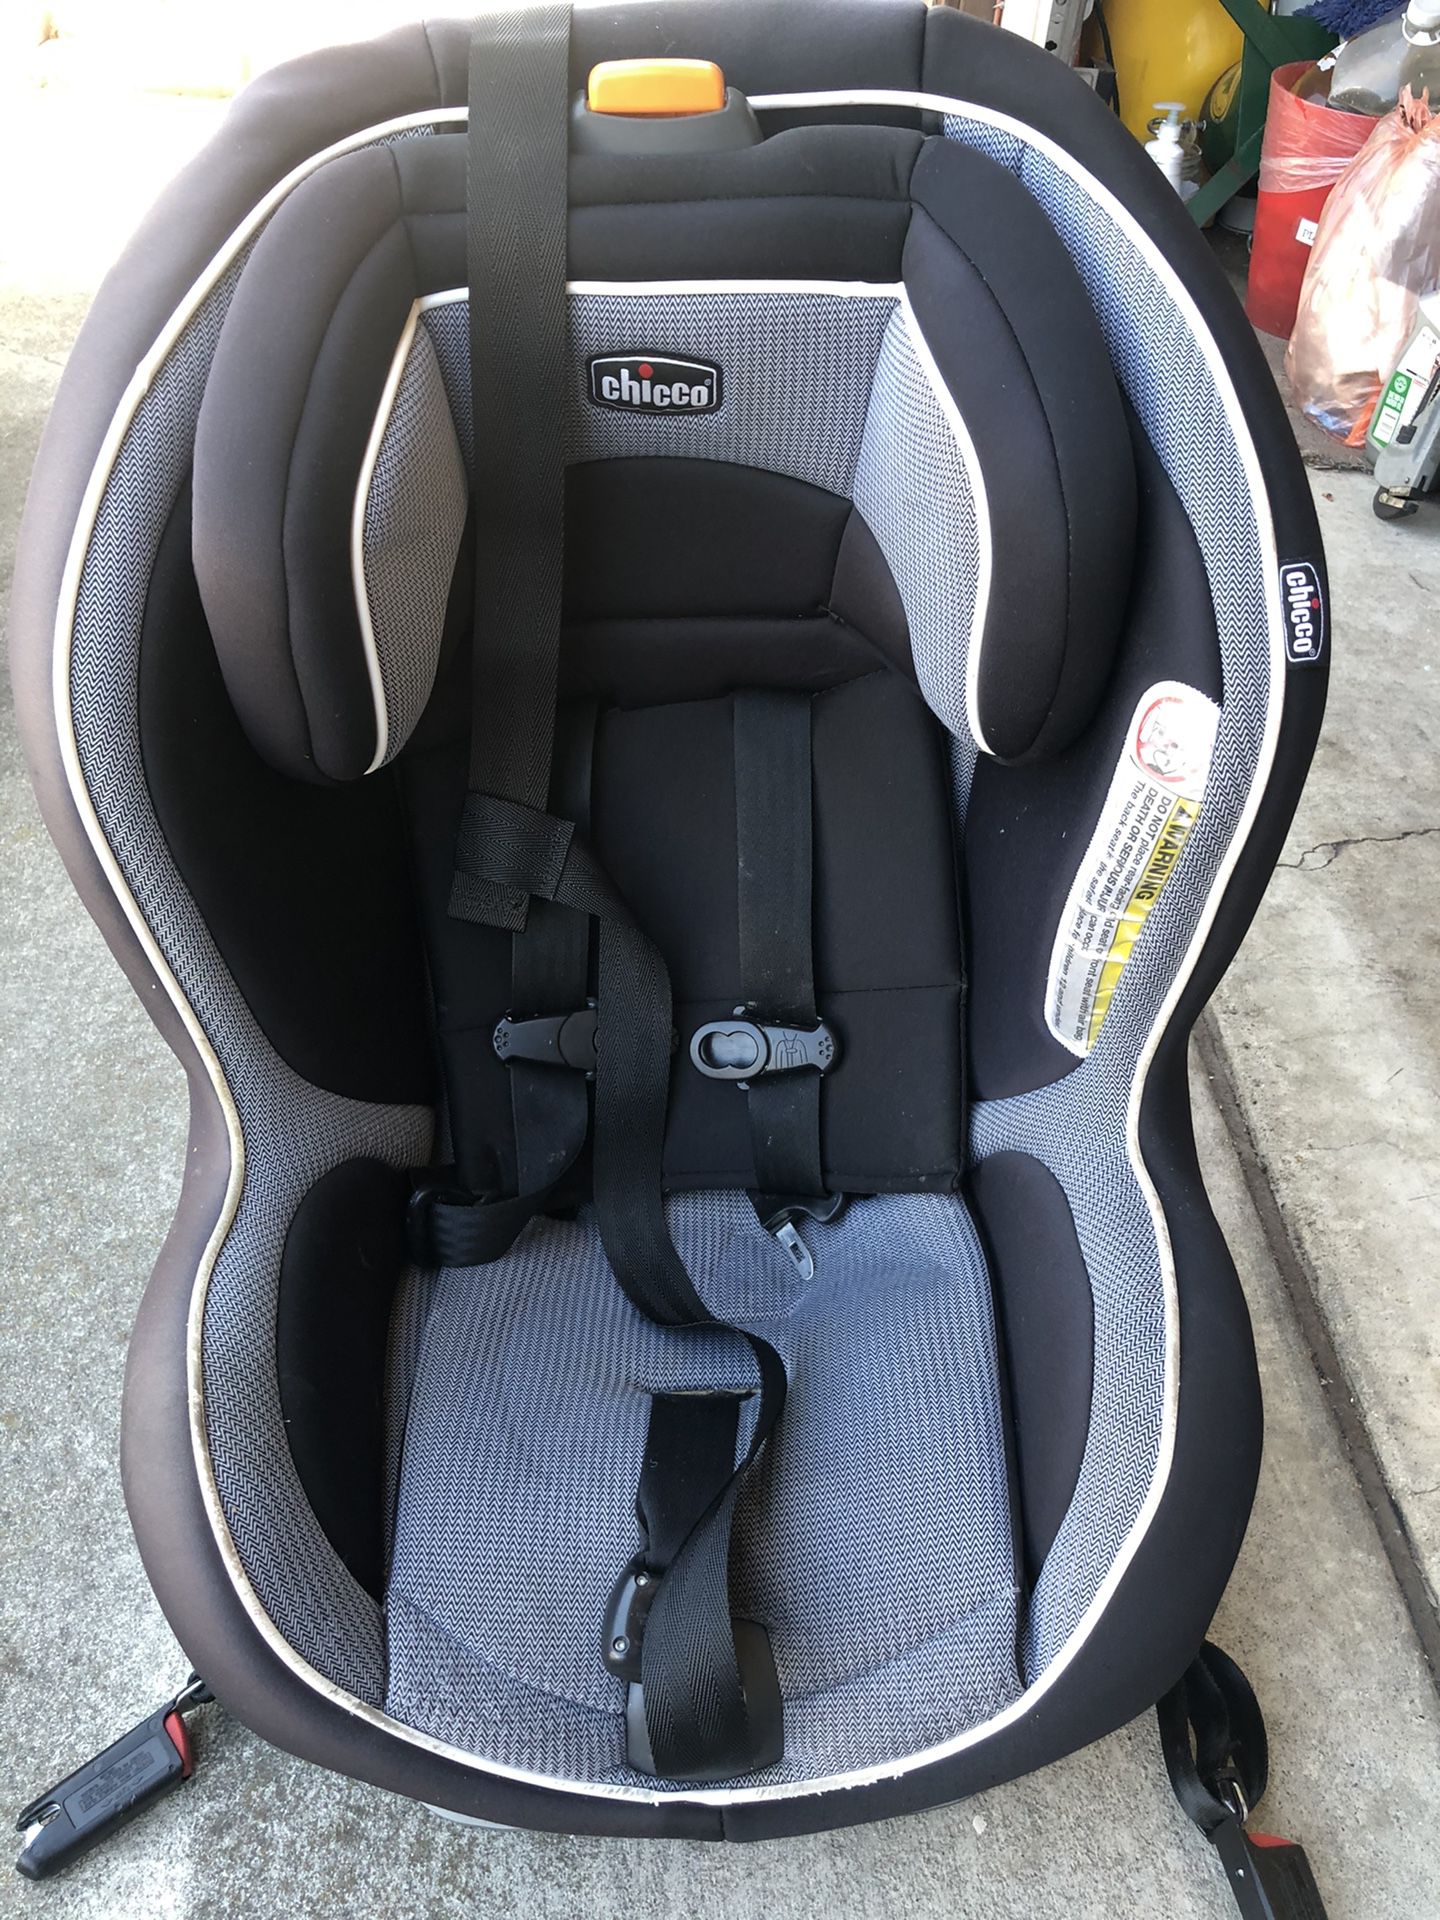 CHICCO Used Car Seat